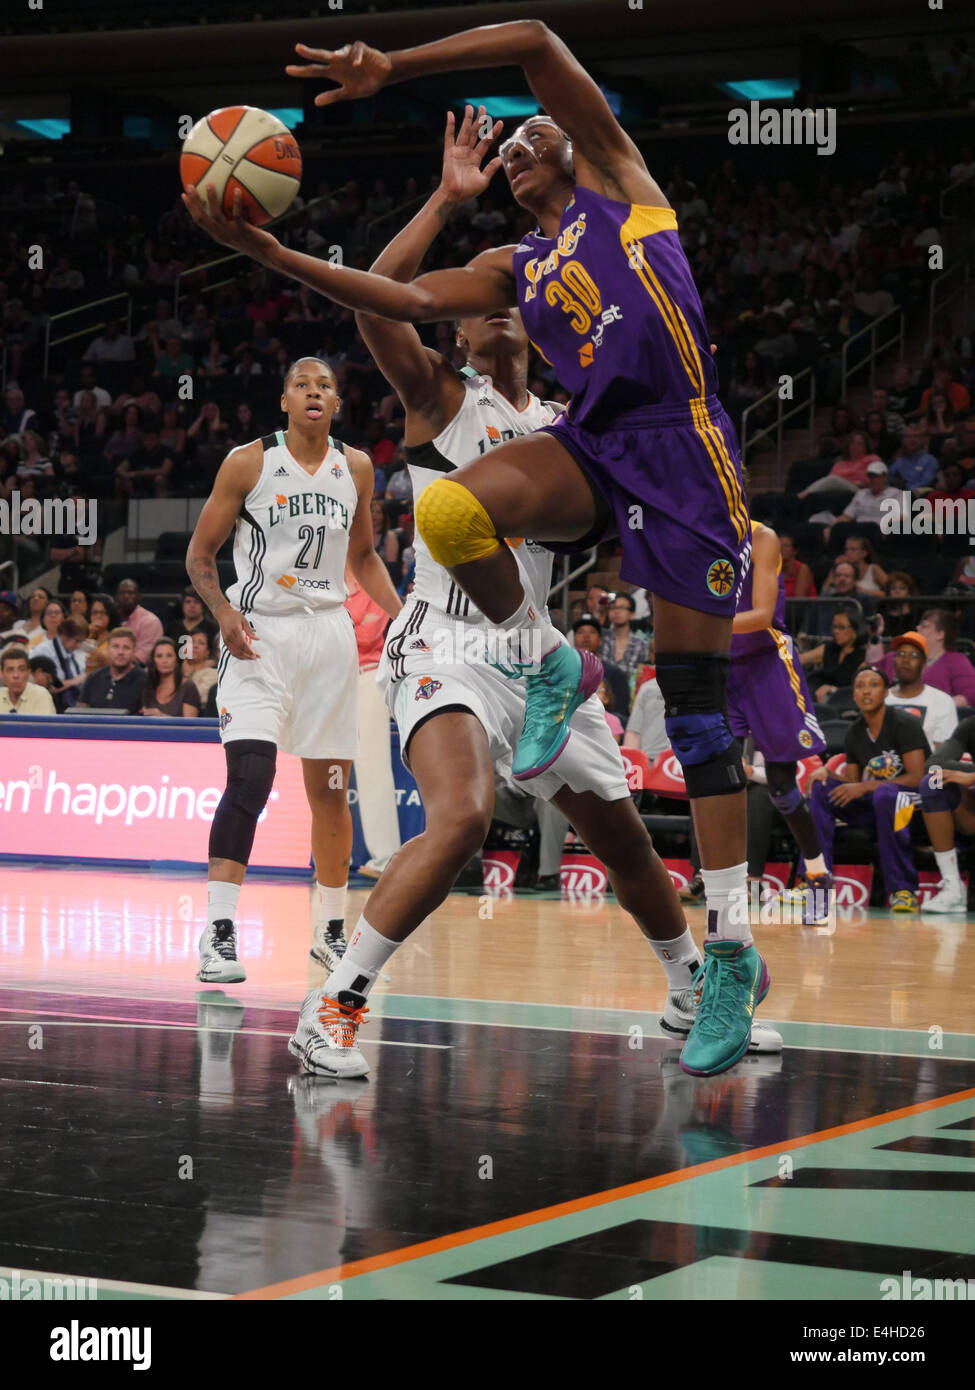 New York City, New Jersey, USA. 11th July, 2014. Los Angeles Sparks forward, NNEKA OGWUMIKE (30), drives to the basket against New York in a game at Madison Square Garden in New York City. © Joel Plummer/ZUMA Wire/Alamy Live News Stock Photo